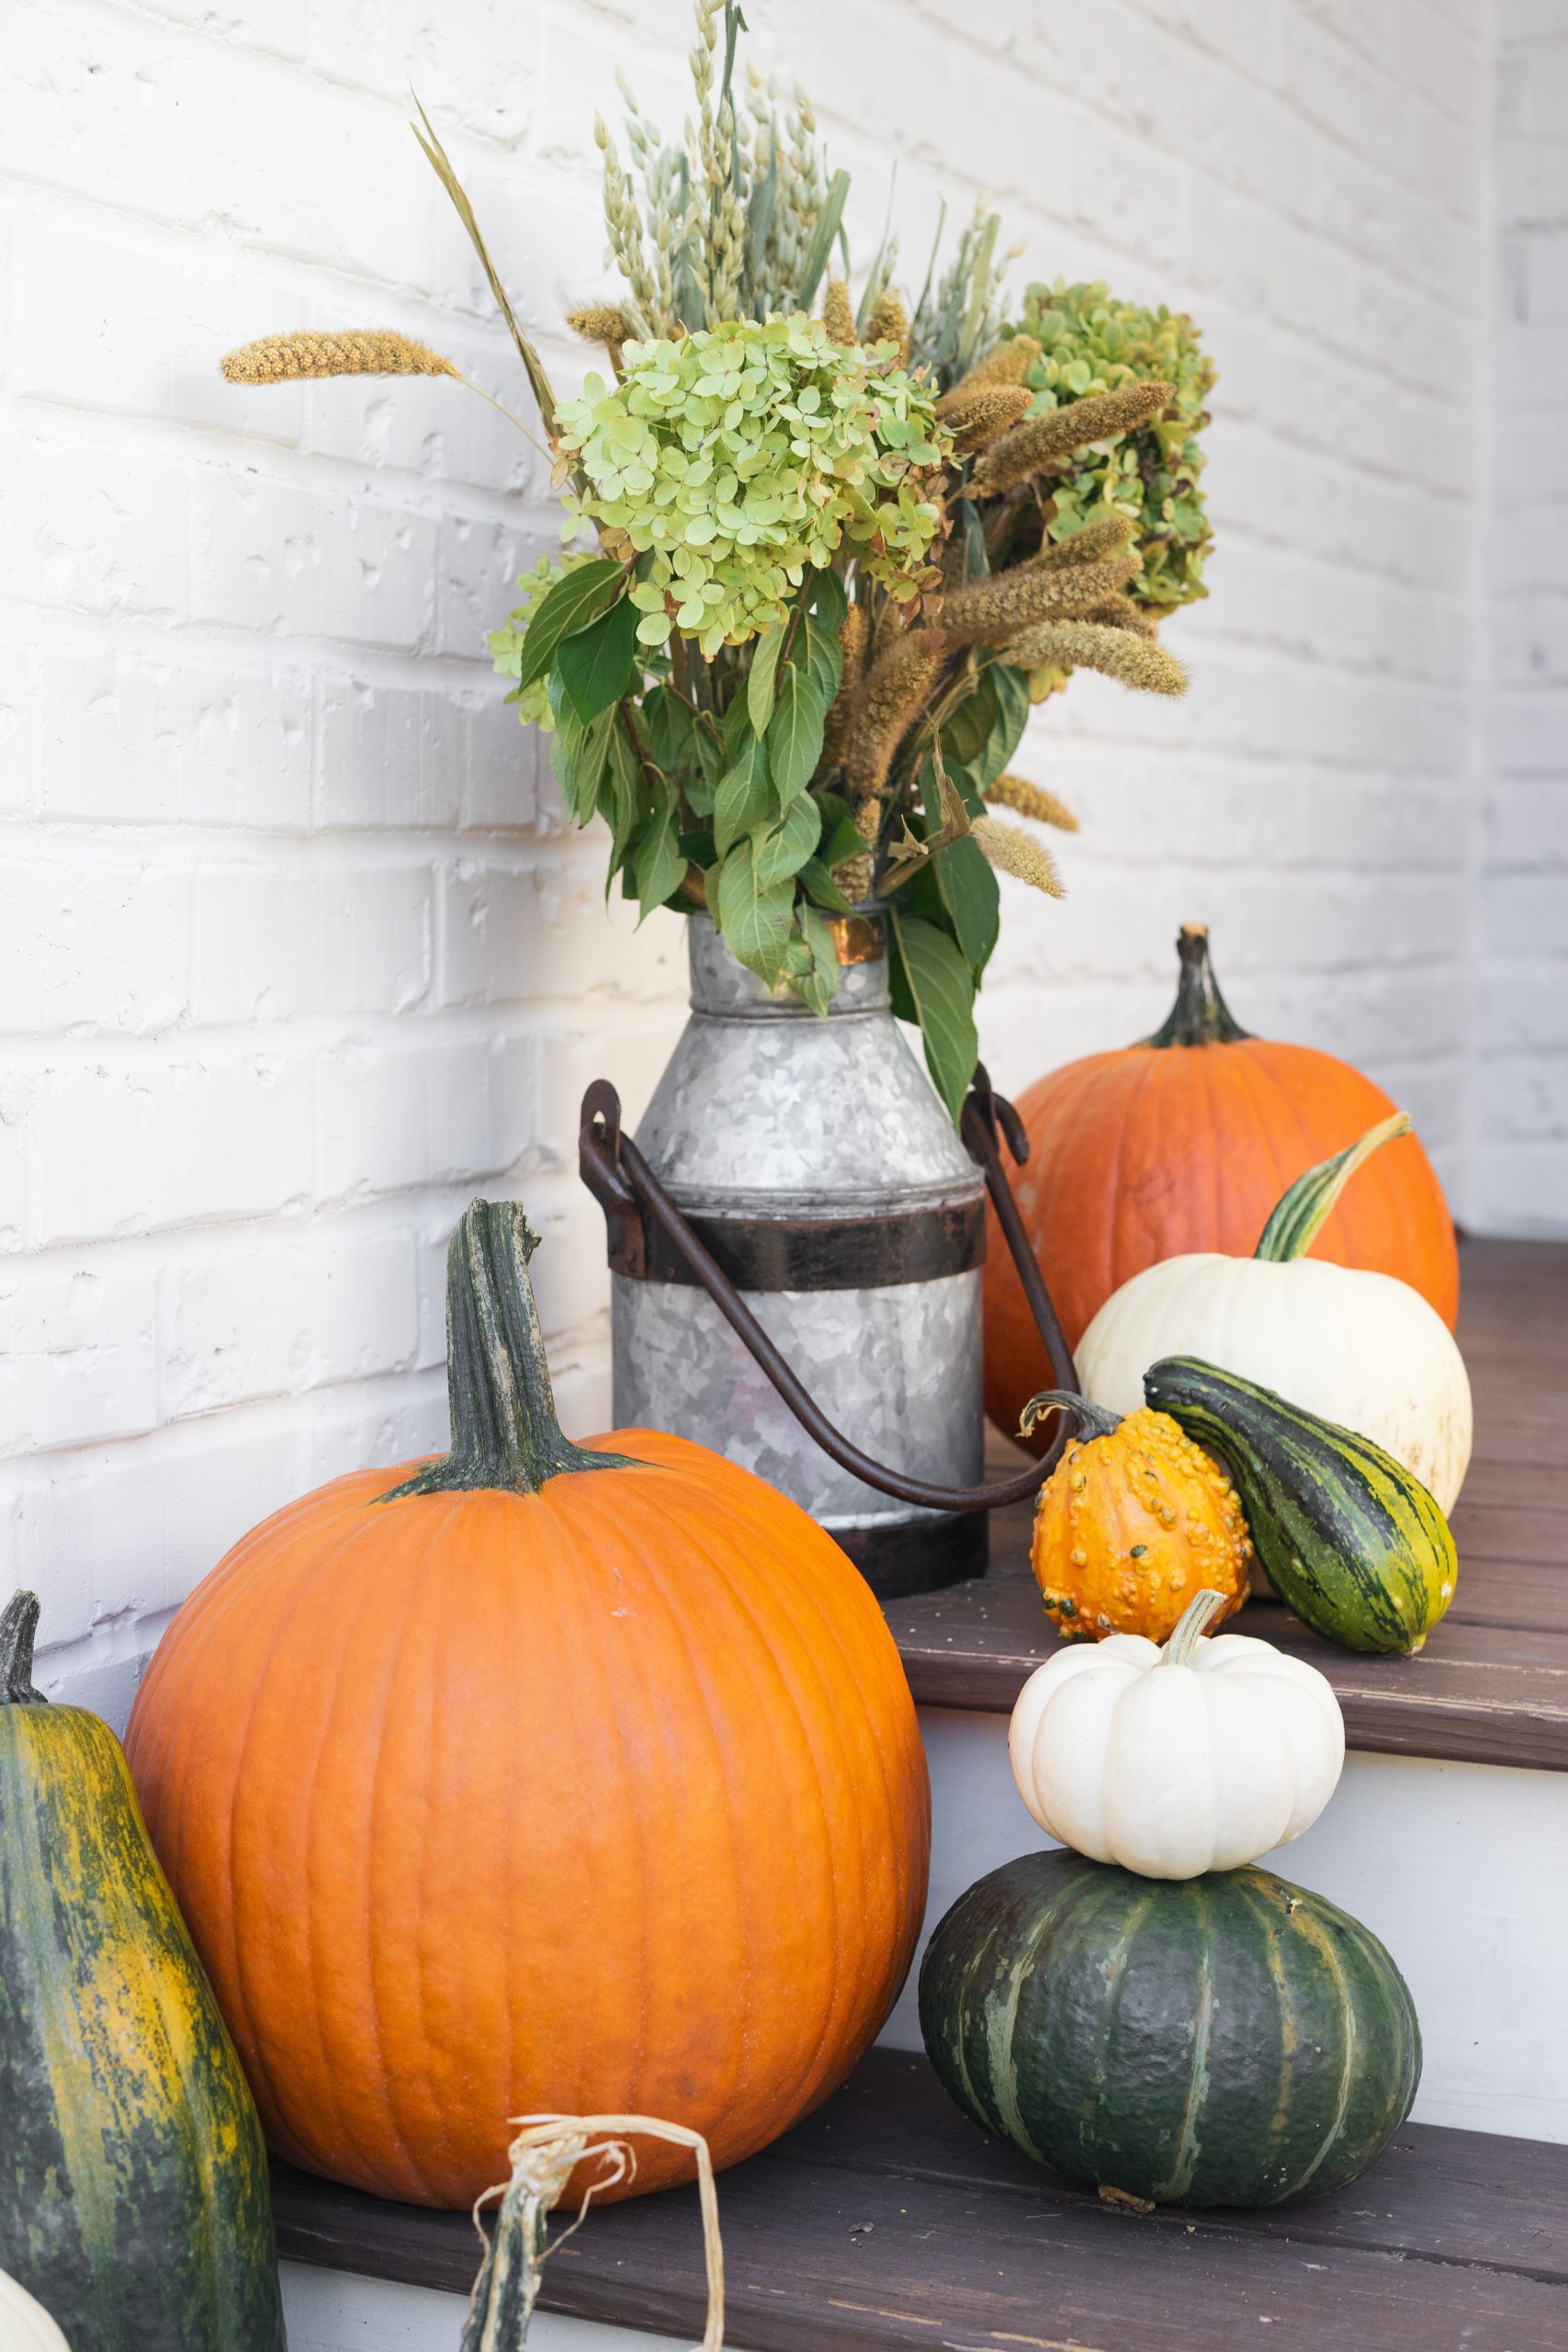 5 Ways to Make Your Porch Pinterest-Worthy This Fall – Harrison Homes